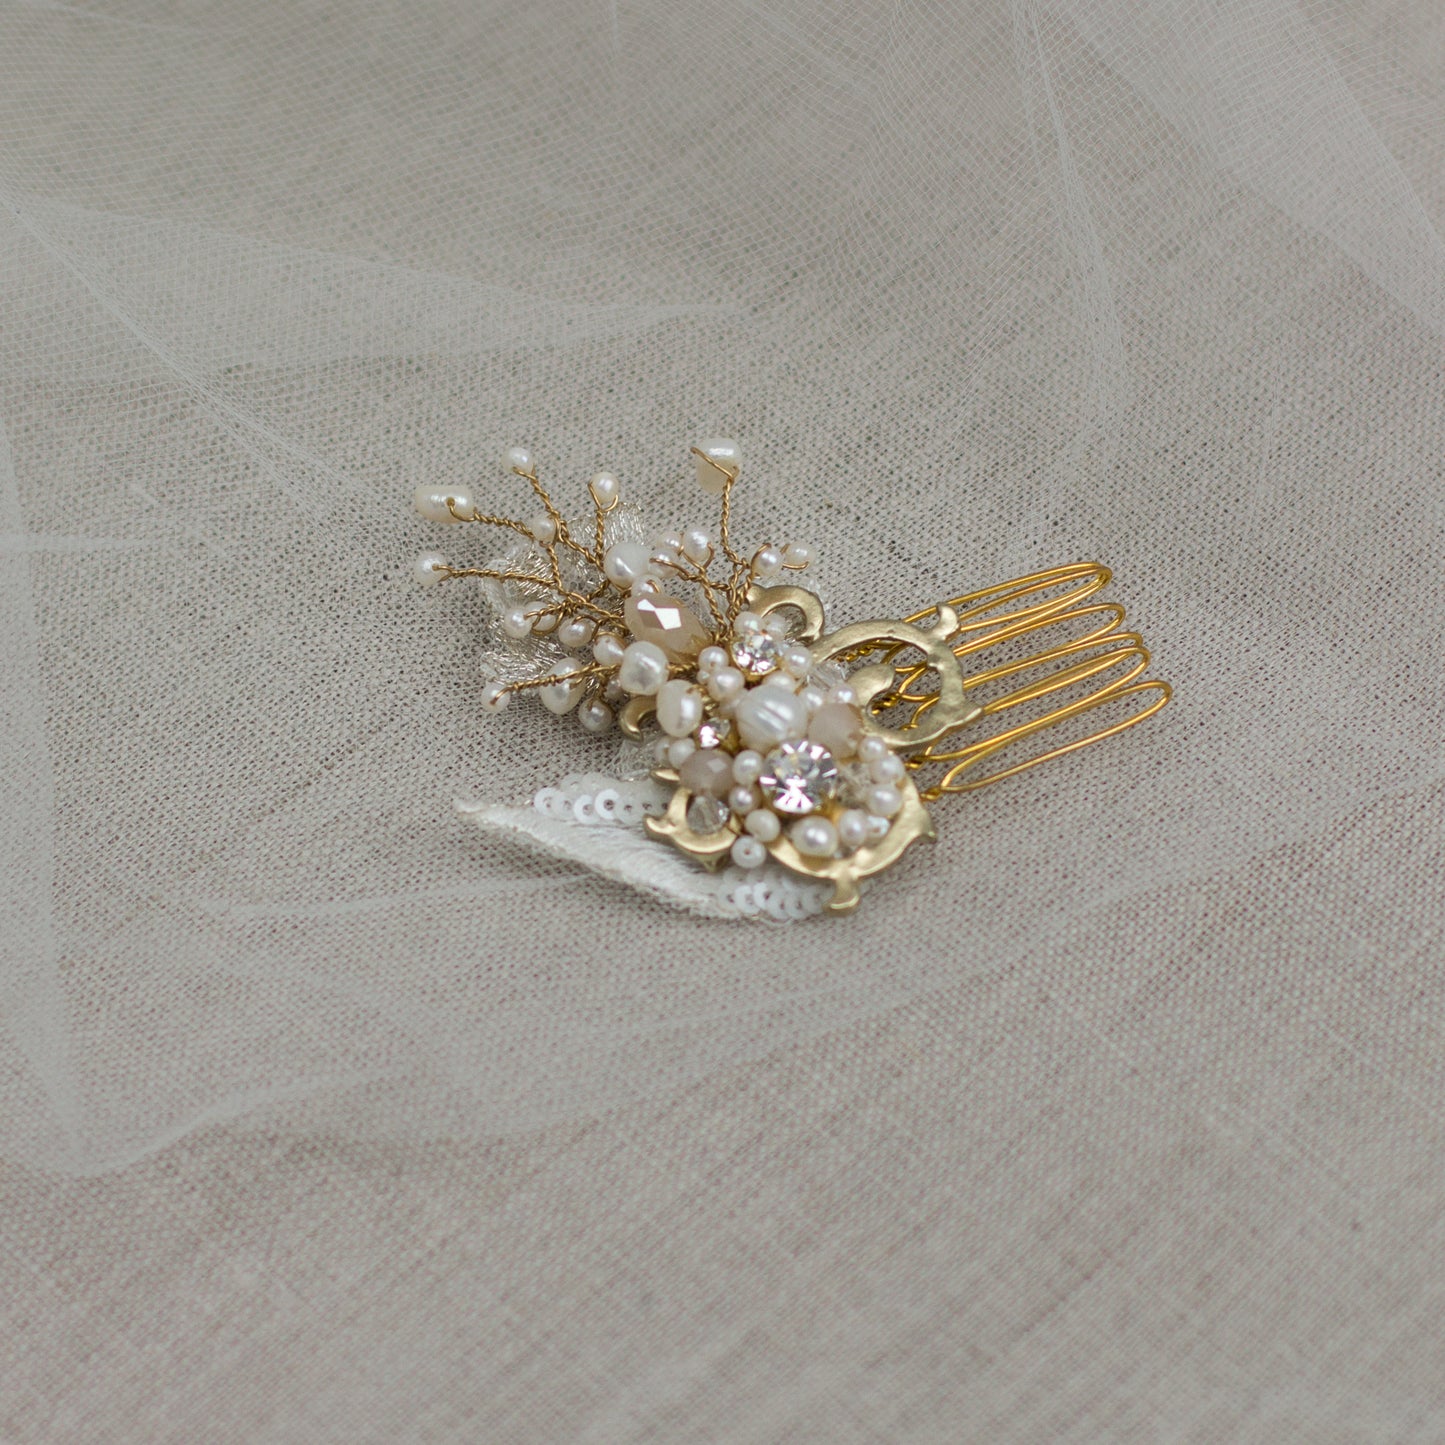 buy online Pearl hairpiece, Gold hairpiece, Handmade Wedding hair accessories, Bridal hair comb, Pearl Wedding headpiece, Gold fascinator, Wedding fascinator, Bridal boutique